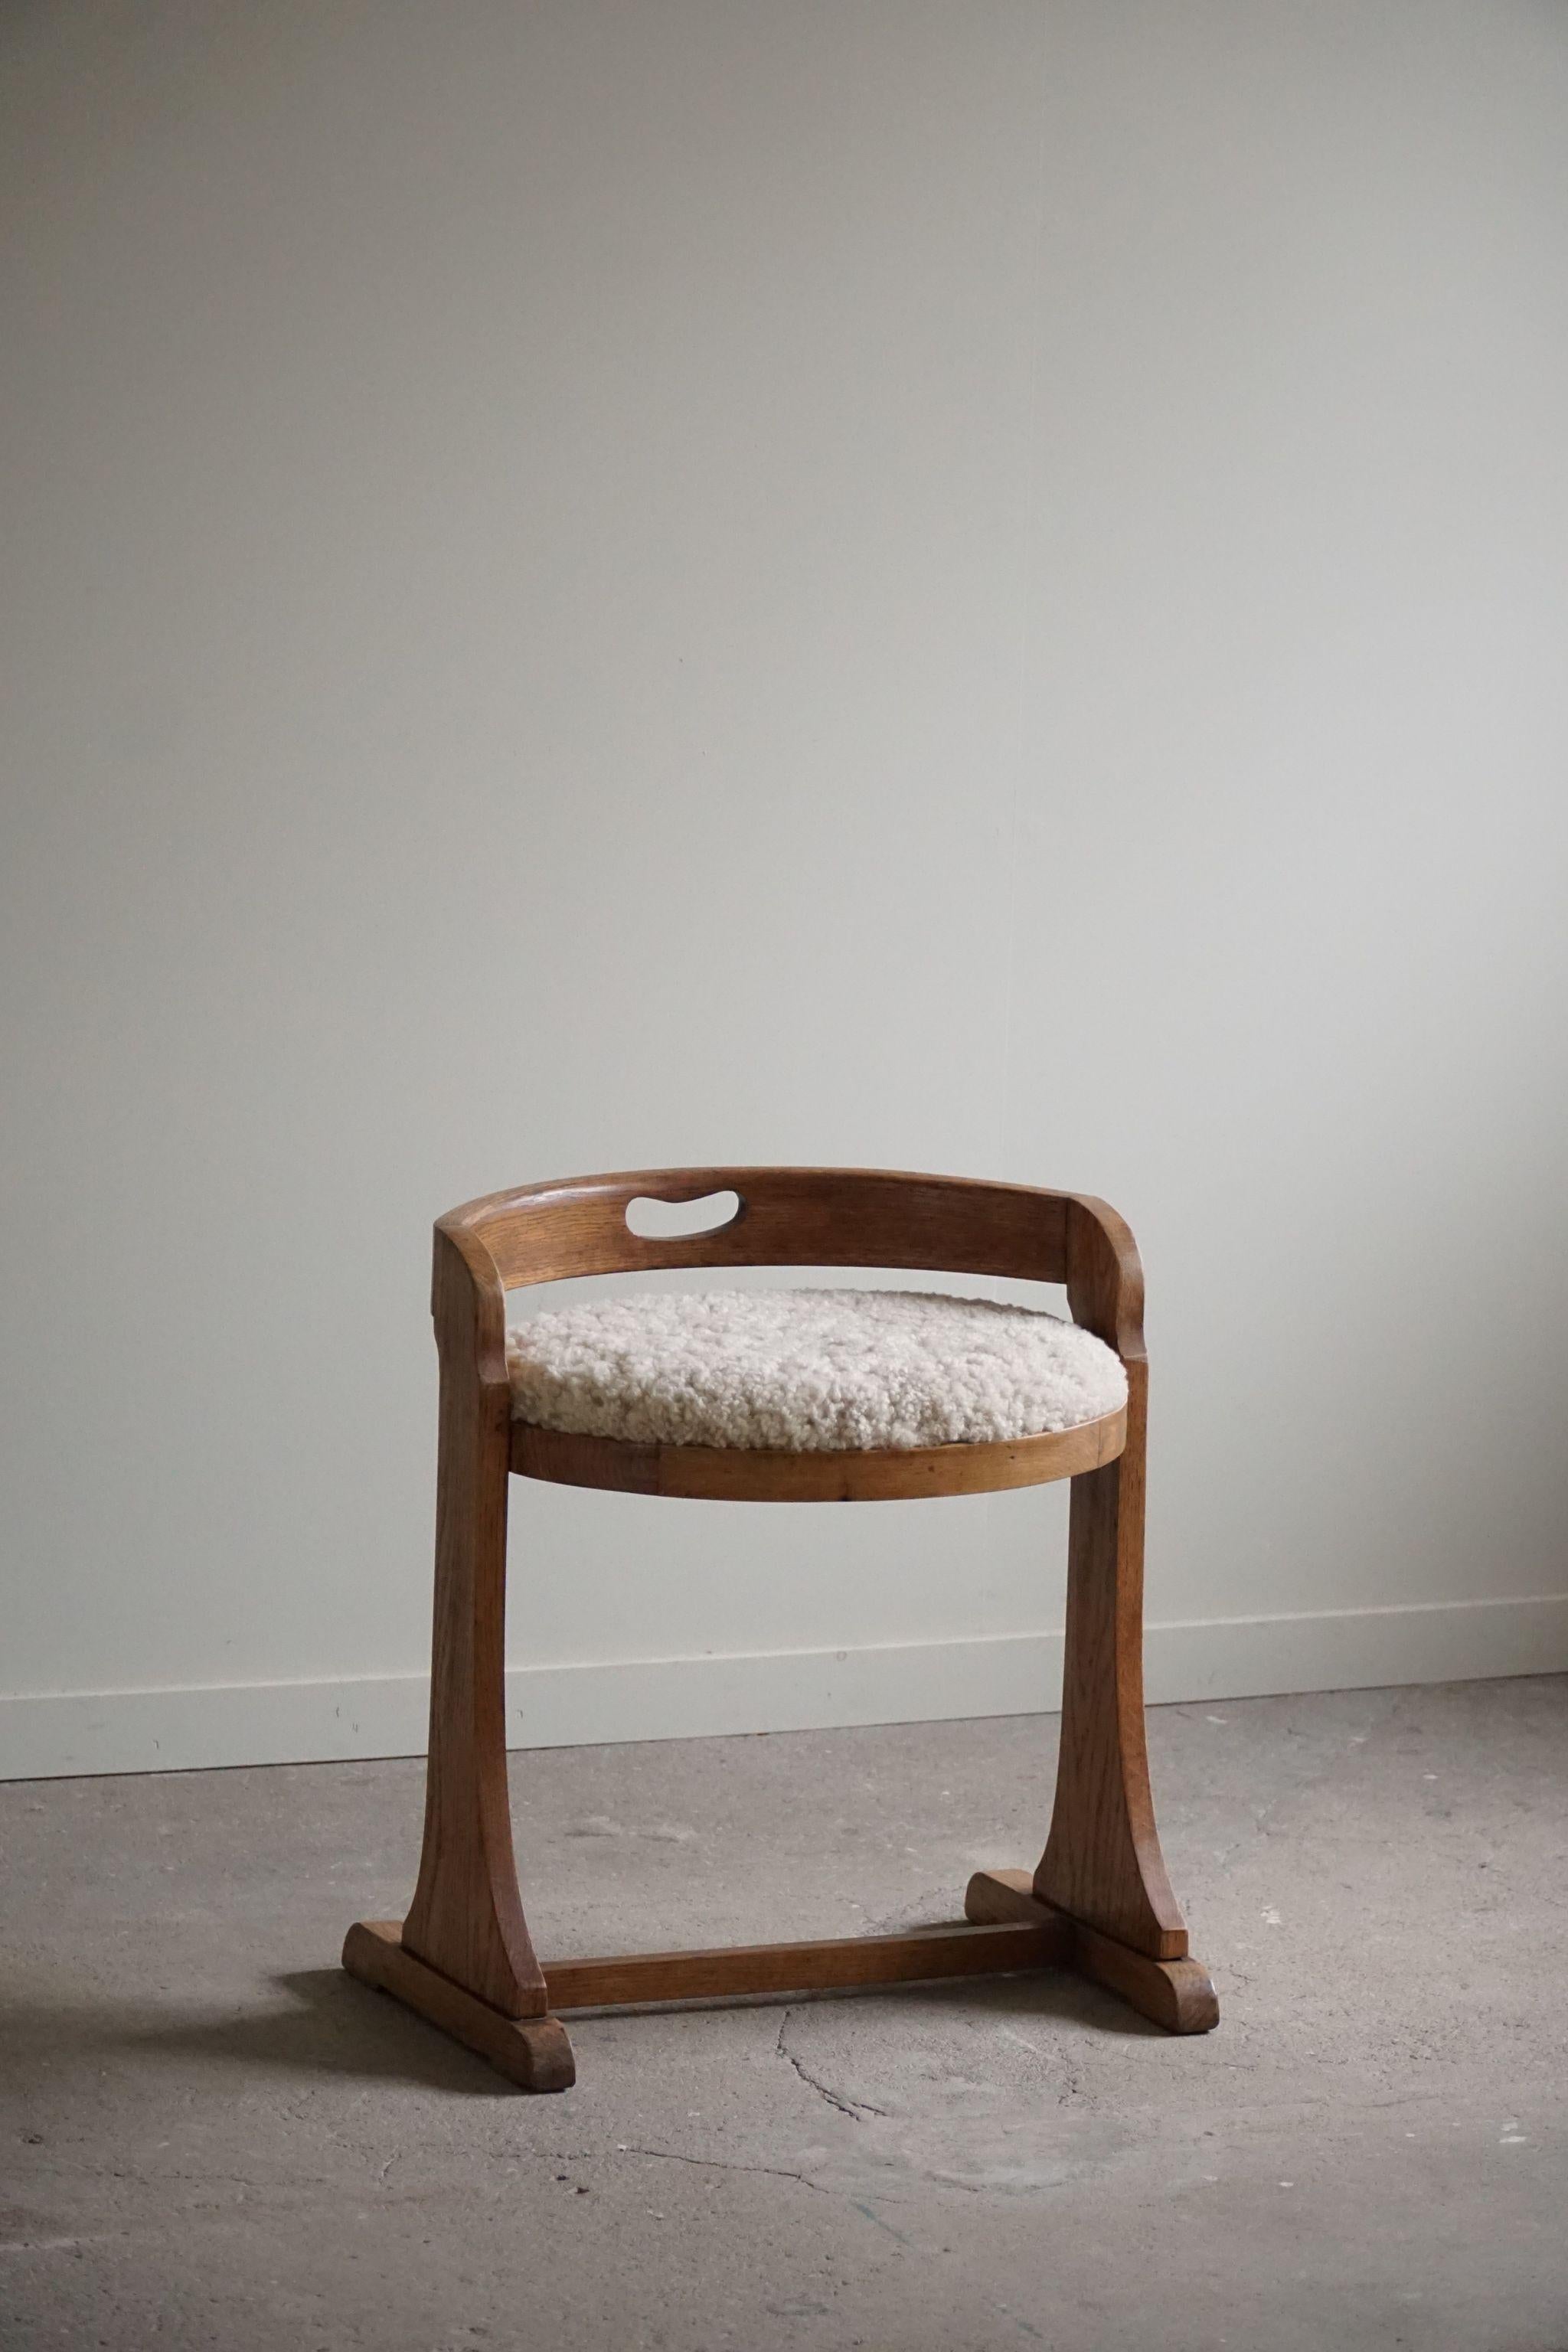 20th Century Low Back Chair in Oak & Reupholstered in Lambswool, Danish Mid Century, 1950s For Sale